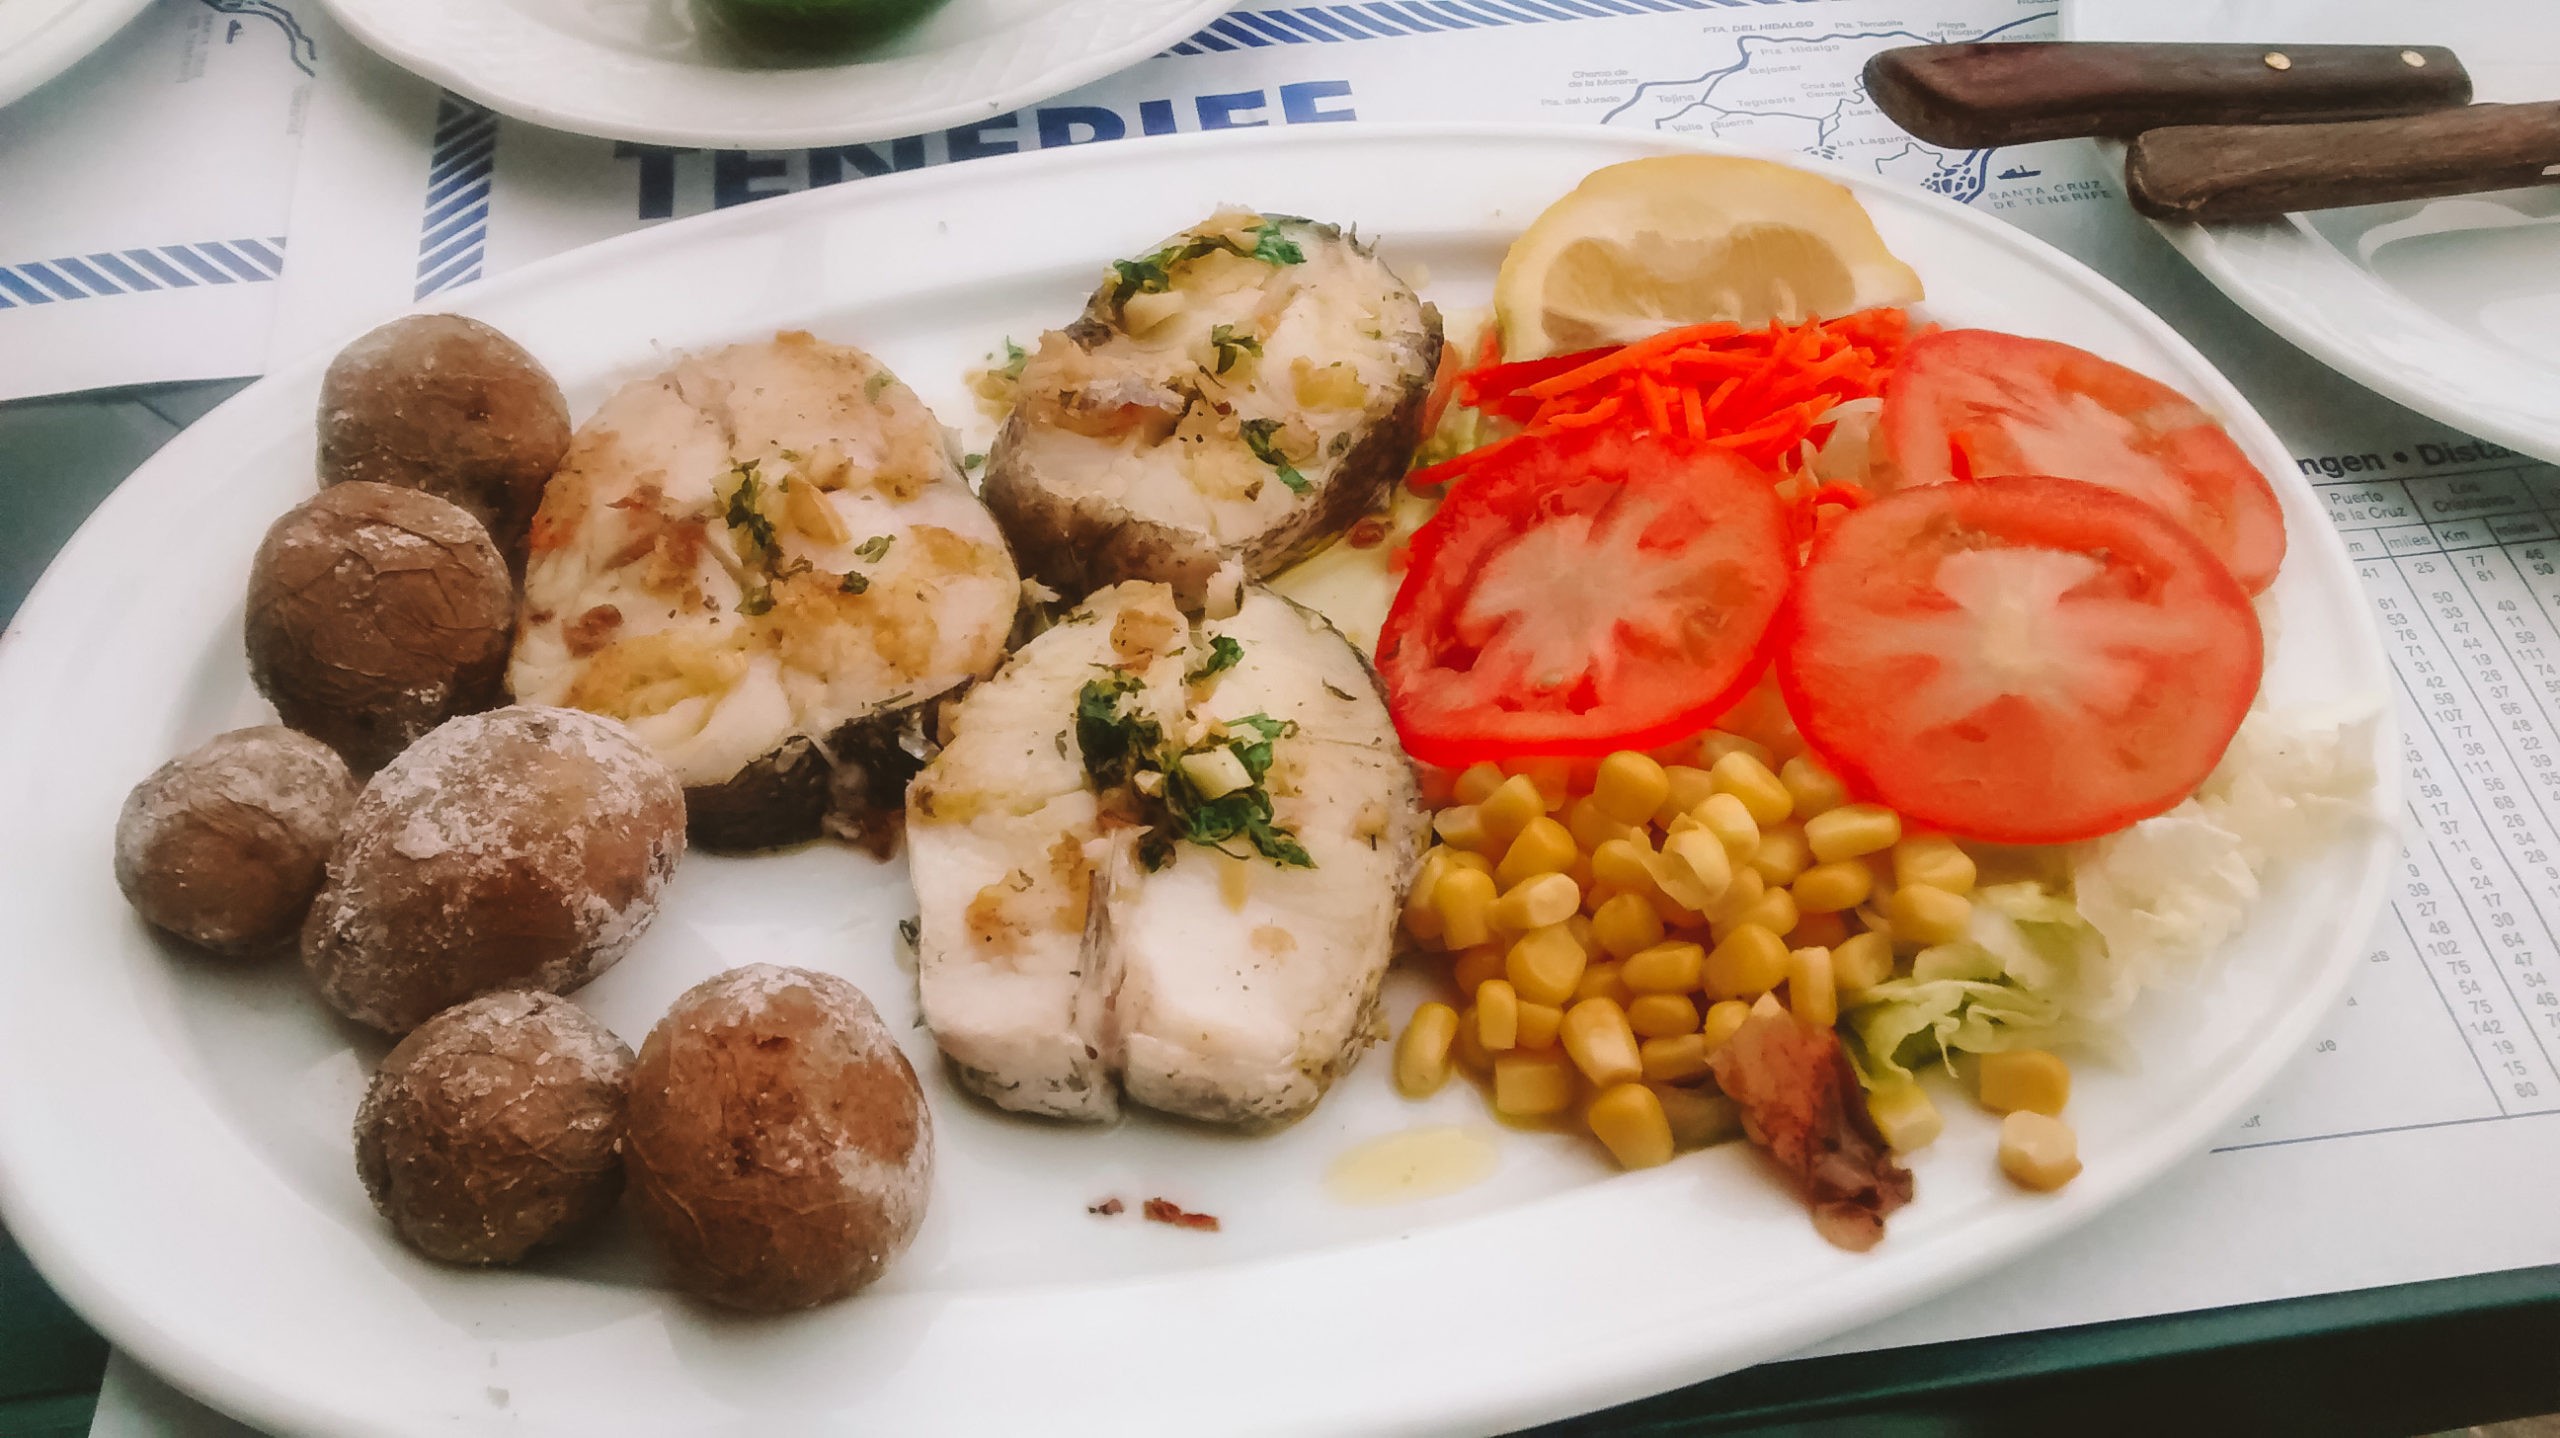 CANARY ISLAND CUISINE - WHAT YOU SHOULD TRY